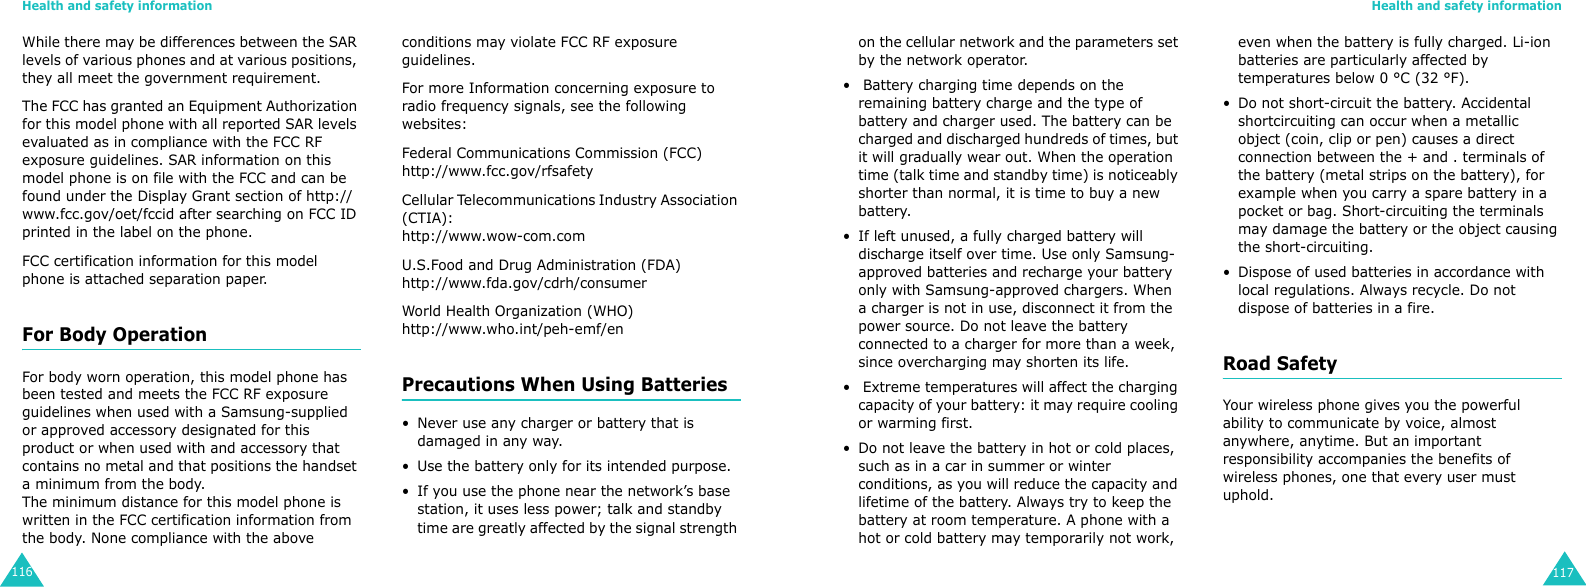 Health and safety information116While there may be differences between the SAR levels of various phones and at various positions, they all meet the government requirement.The FCC has granted an Equipment Authorization for this model phone with all reported SAR levels evaluated as in compliance with the FCC RF exposure guidelines. SAR information on this model phone is on file with the FCC and can be found under the Display Grant section of http://www.fcc.gov/oet/fccid after searching on FCC ID printed in the label on the phone.FCC certification information for this model phone is attached separation paper.For Body OperationFor body worn operation, this model phone has been tested and meets the FCC RF exposure guidelines when used with a Samsung-supplied or approved accessory designated for this product or when used with and accessory that contains no metal and that positions the handset a minimum from the body.The minimum distance for this model phone is written in the FCC certification information from the body. None compliance with the above conditions may violate FCC RF exposure guidelines.For more Information concerning exposure to radio frequency signals, see the following websites:Federal Communications Commission (FCC) http://www.fcc.gov/rfsafetyCellular Telecommunications Industry Association (CTIA):http://www.wow-com.comU.S.Food and Drug Administration (FDA)http://www.fda.gov/cdrh/consumerWorld Health Organization (WHO)http://www.who.int/peh-emf/enPrecautions When Using Batteries• Never use any charger or battery that is damaged in any way.• Use the battery only for its intended purpose.• If you use the phone near the network’s base station, it uses less power; talk and standby time are greatly affected by the signal strength Health and safety information117on the cellular network and the parameters set by the network operator.•  Battery charging time depends on the remaining battery charge and the type of battery and charger used. The battery can be charged and discharged hundreds of times, but it will gradually wear out. When the operation time (talk time and standby time) is noticeably shorter than normal, it is time to buy a new battery.• If left unused, a fully charged battery will discharge itself over time. Use only Samsung-approved batteries and recharge your battery only with Samsung-approved chargers. When a charger is not in use, disconnect it from the power source. Do not leave the battery connected to a charger for more than a week, since overcharging may shorten its life.•  Extreme temperatures will affect the charging capacity of your battery: it may require cooling or warming first.• Do not leave the battery in hot or cold places, such as in a car in summer or winter conditions, as you will reduce the capacity and lifetime of the battery. Always try to keep the battery at room temperature. A phone with a hot or cold battery may temporarily not work, even when the battery is fully charged. Li-ion batteries are particularly affected by temperatures below 0 °C (32 °F).• Do not short-circuit the battery. Accidental shortcircuiting can occur when a metallic object (coin, clip or pen) causes a direct connection between the + and . terminals of the battery (metal strips on the battery), for example when you carry a spare battery in a pocket or bag. Short-circuiting the terminals may damage the battery or the object causing the short-circuiting.• Dispose of used batteries in accordance with local regulations. Always recycle. Do not dispose of batteries in a fire.Road SafetyYour wireless phone gives you the powerful ability to communicate by voice, almost anywhere, anytime. But an important responsibility accompanies the benefits of wireless phones, one that every user must uphold.